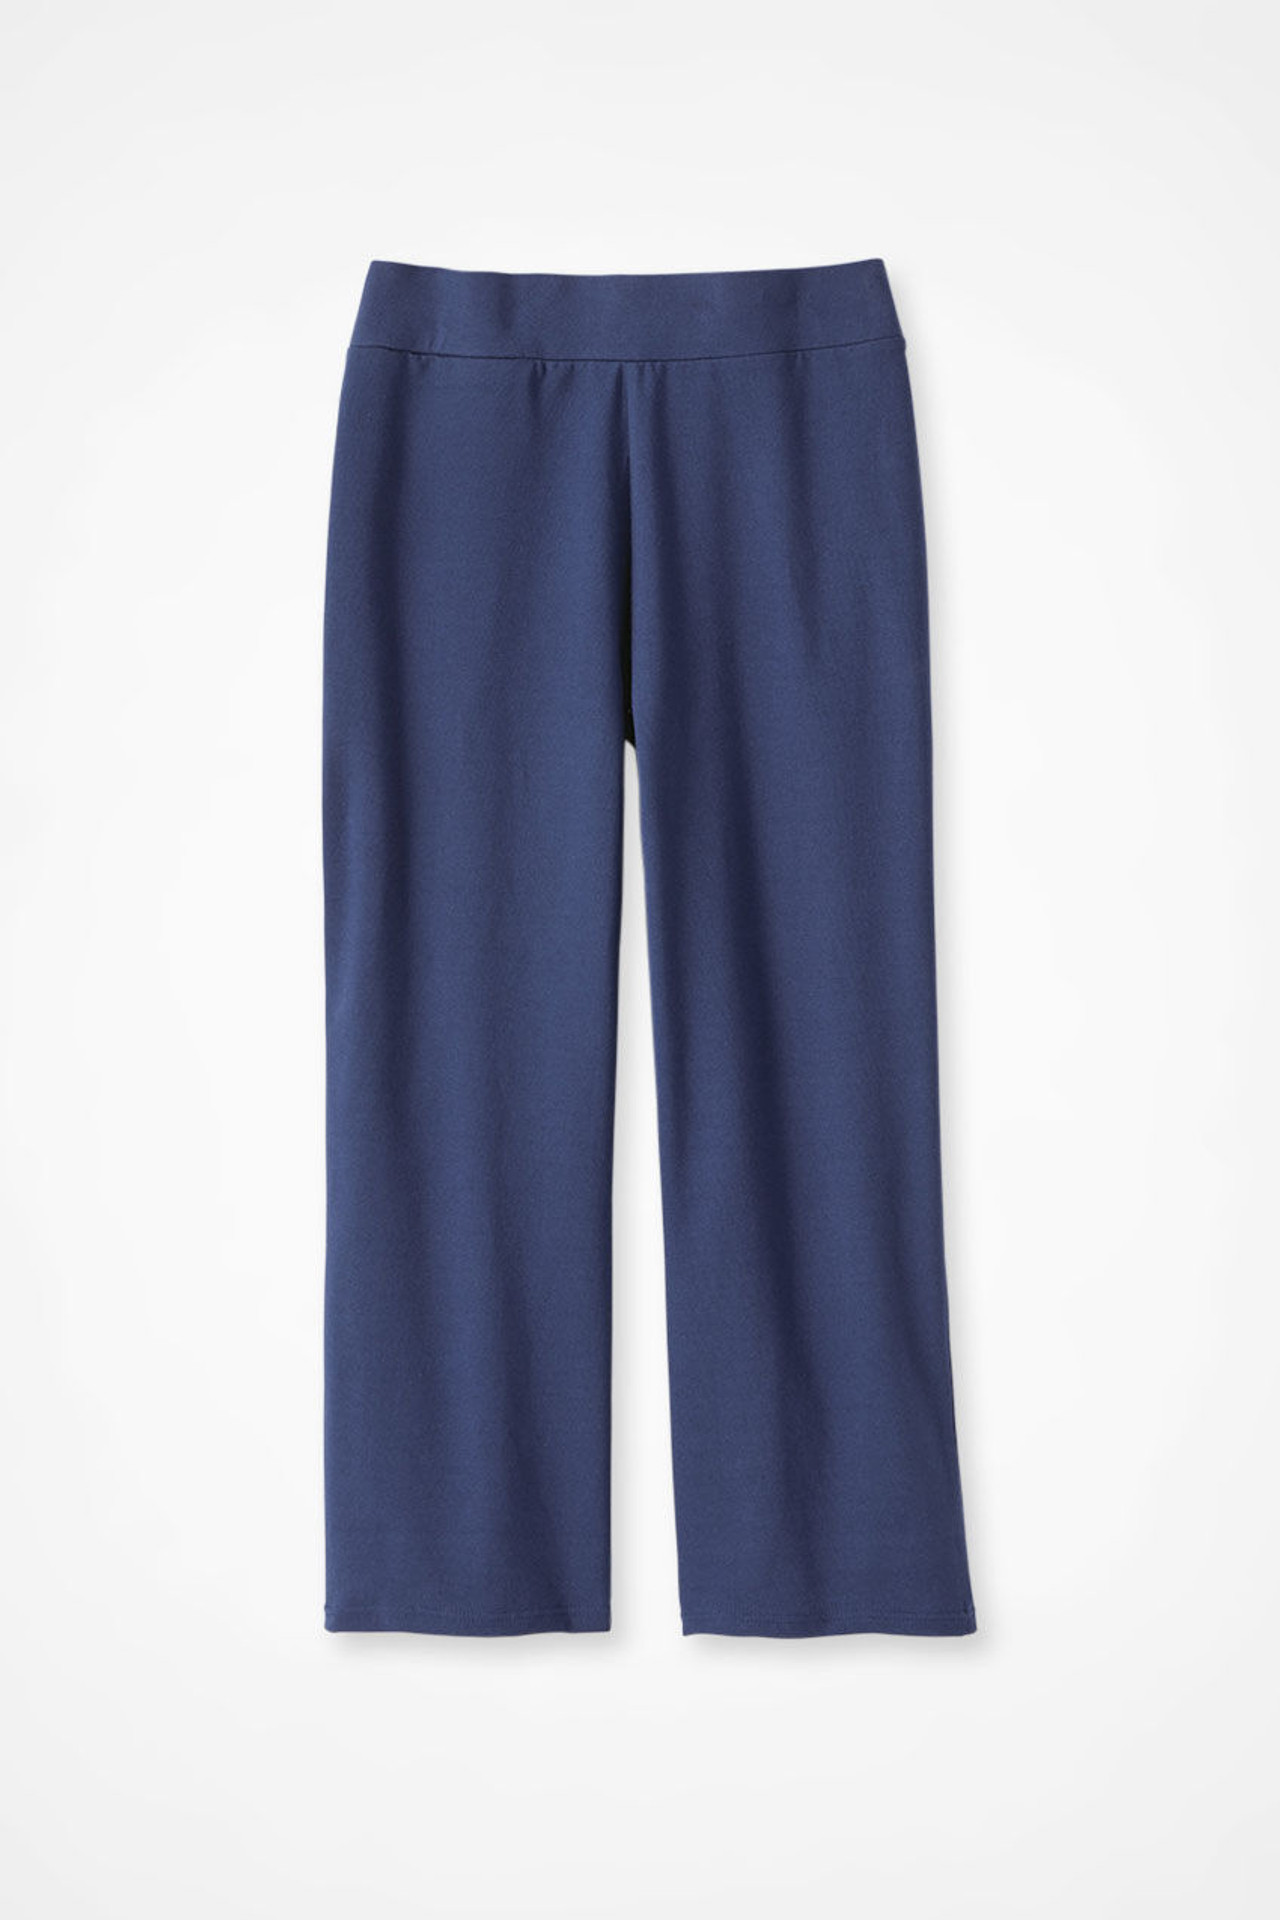 Endless Comfort Cropped Pants